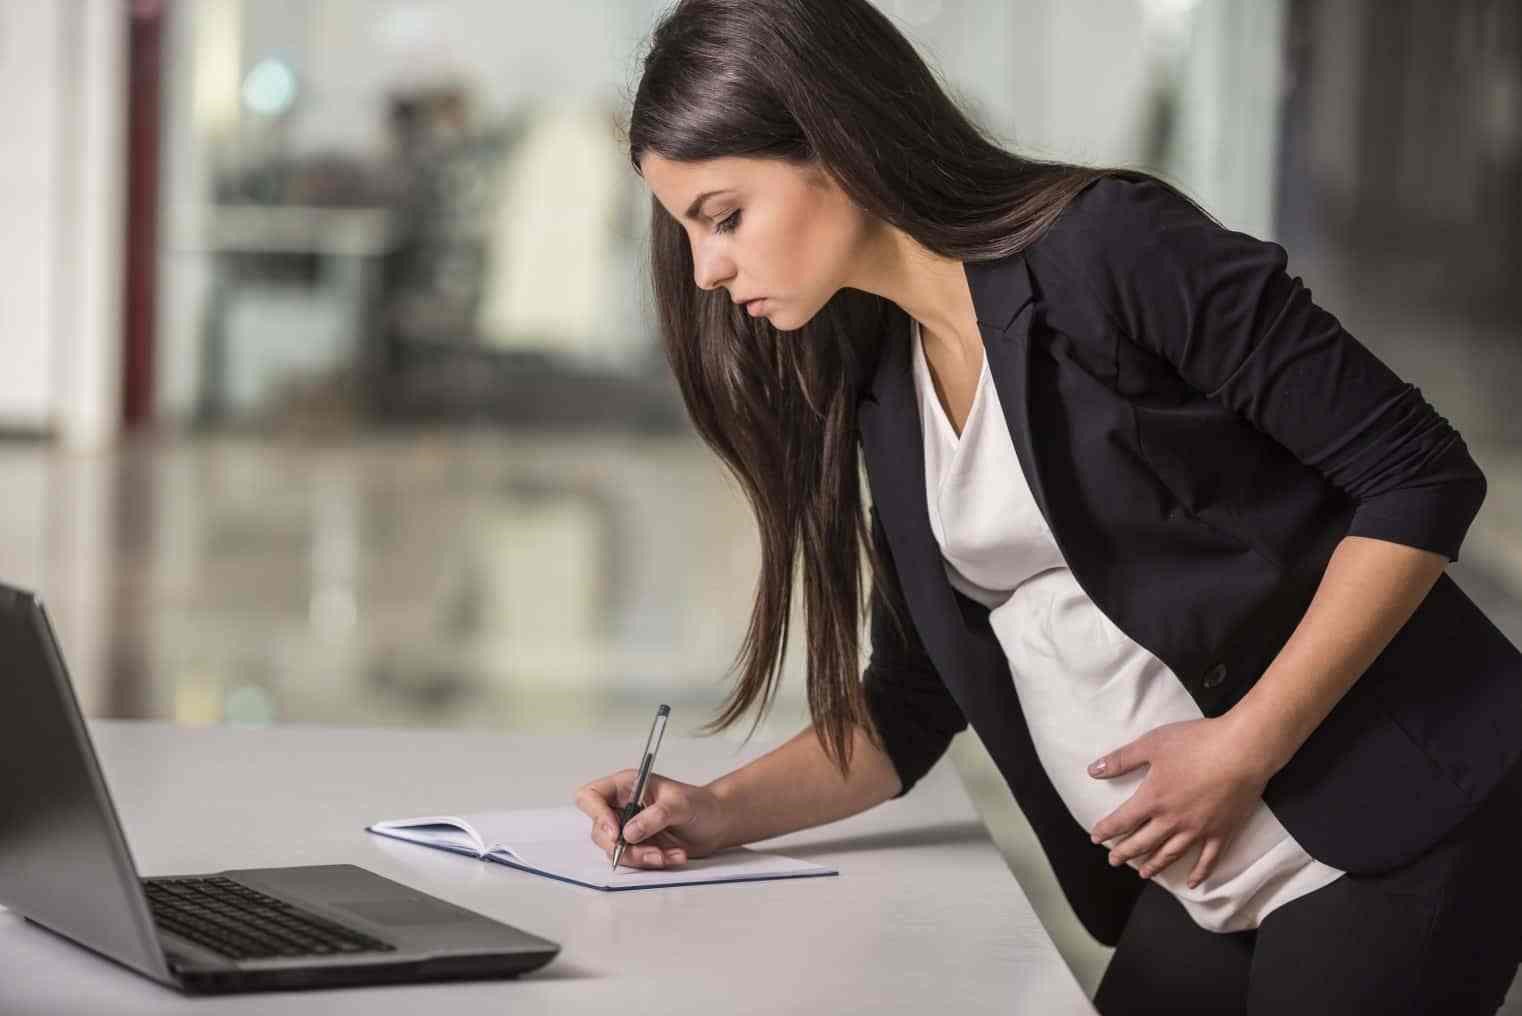 "The Reality of Maternity Leave on Women’s Careers" by Rita Kakati Shah at Uma